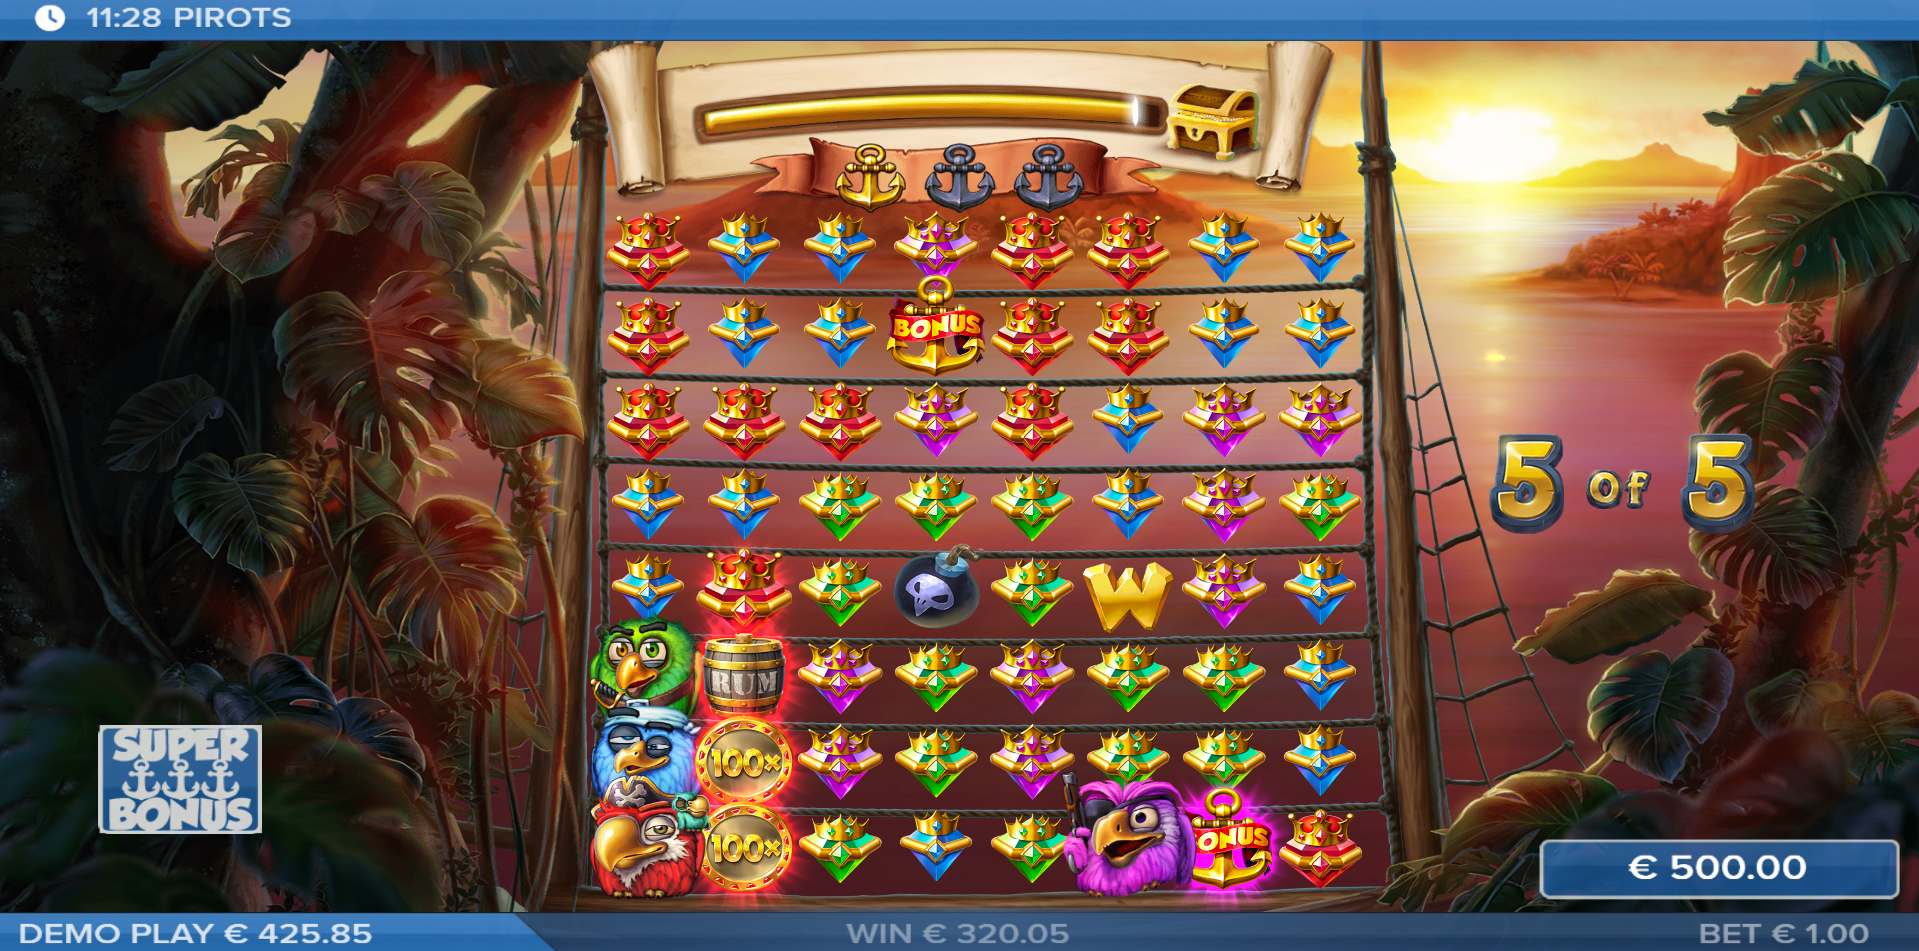 Pirotes Super Free Spins